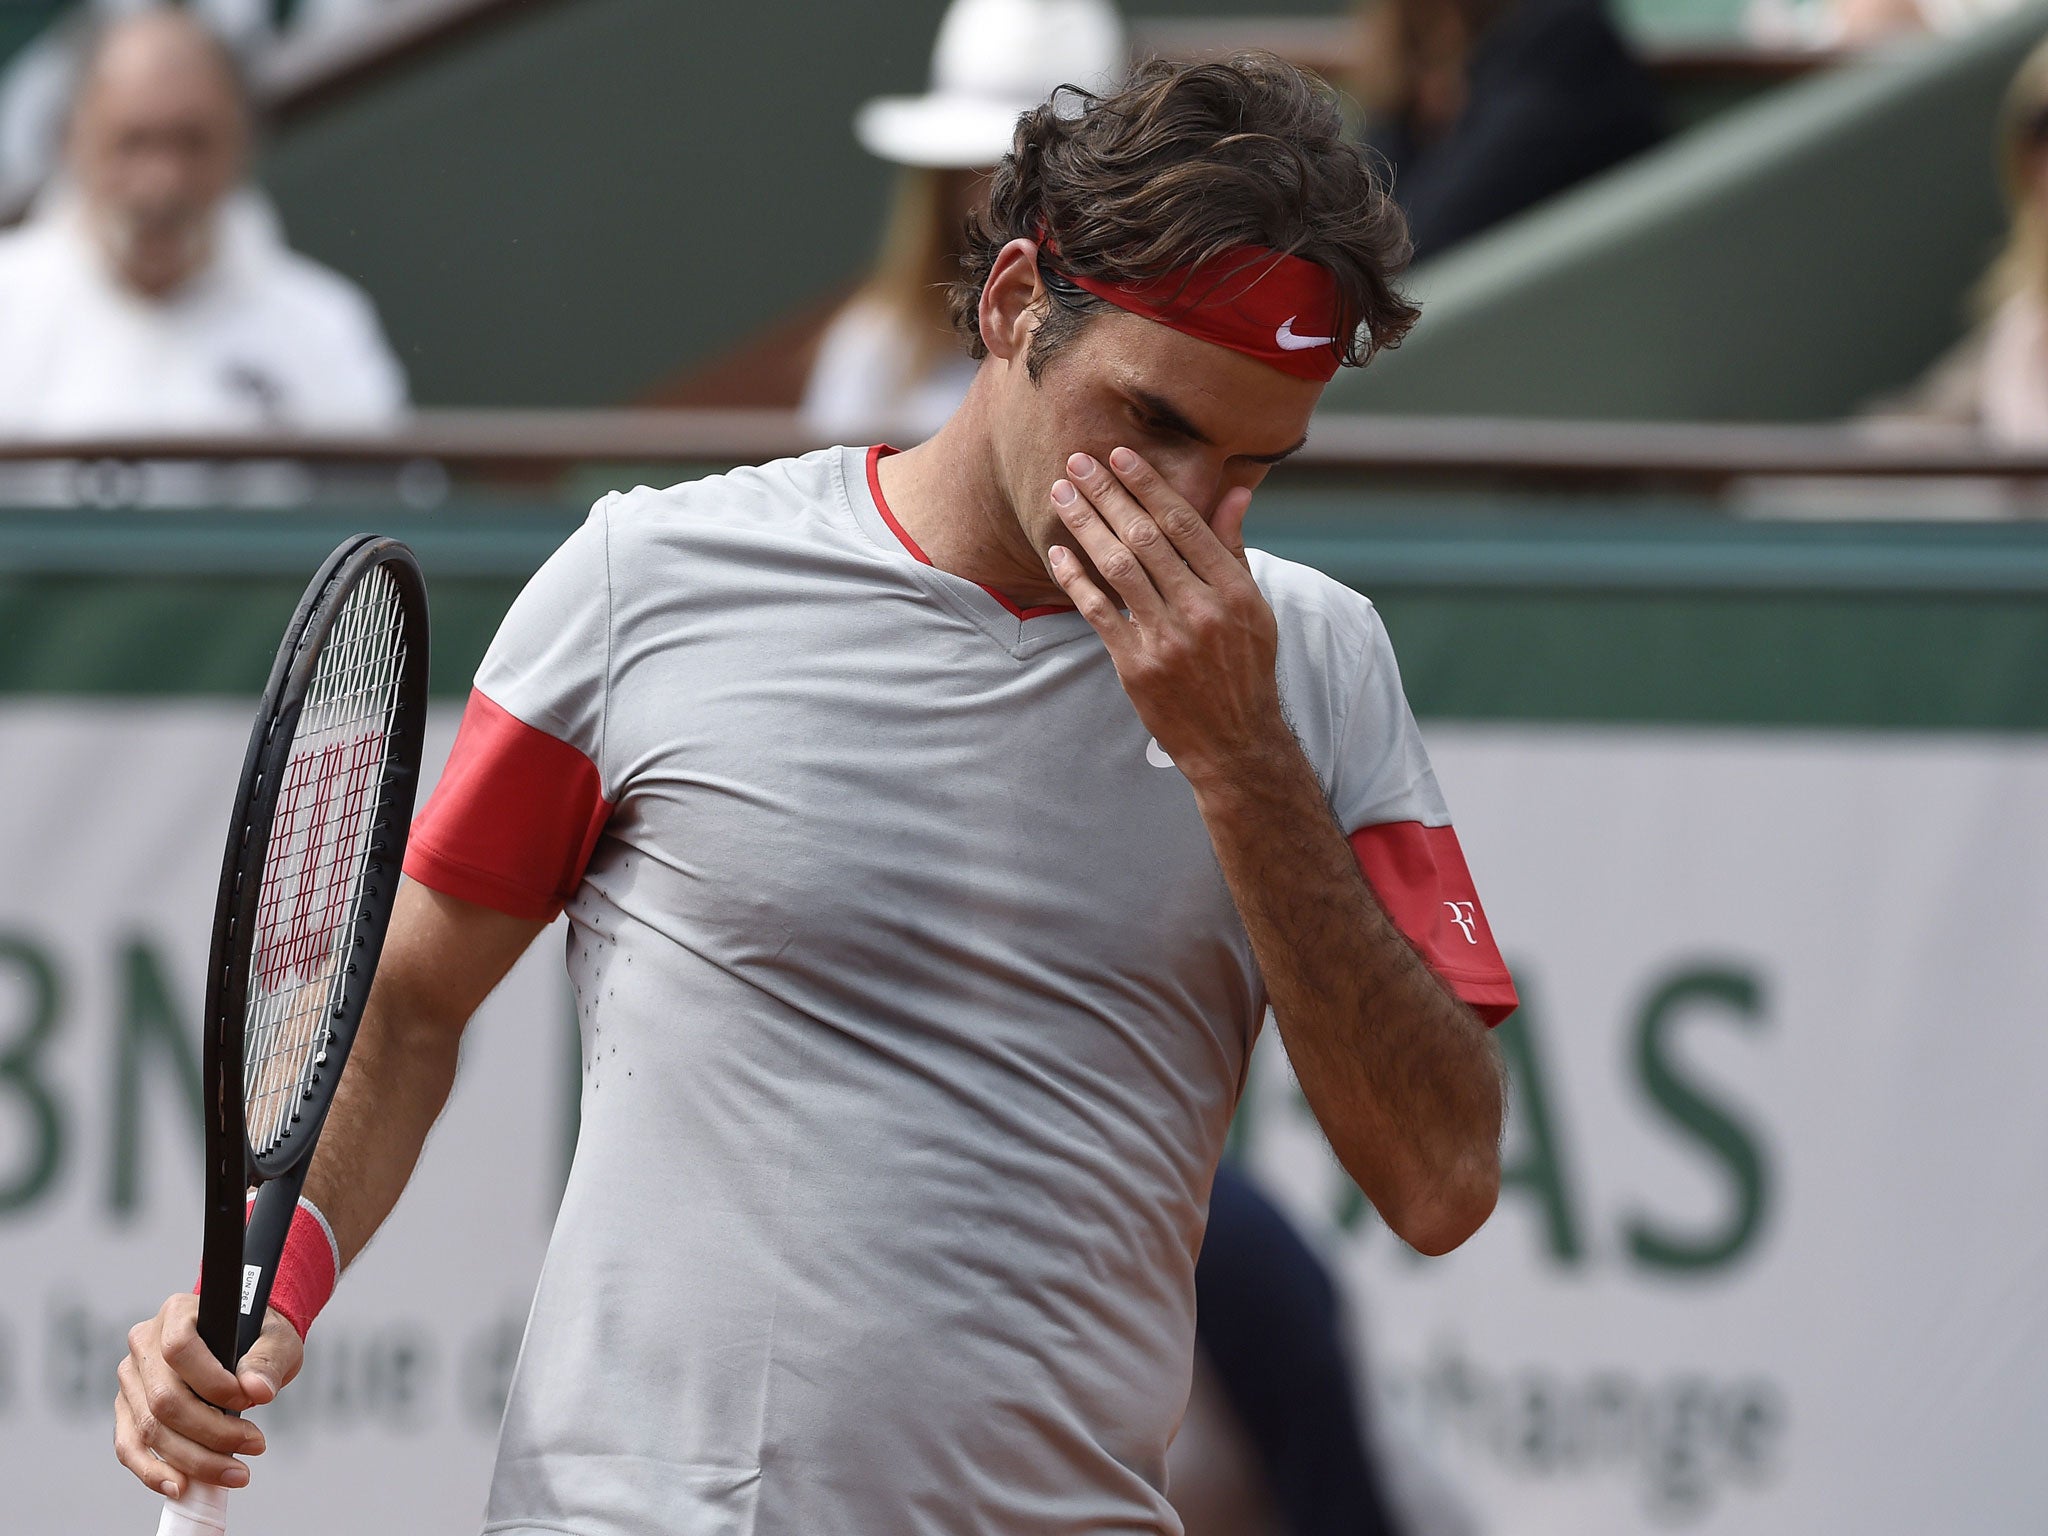 Switzerland's Roger Federer reacts after losing a point